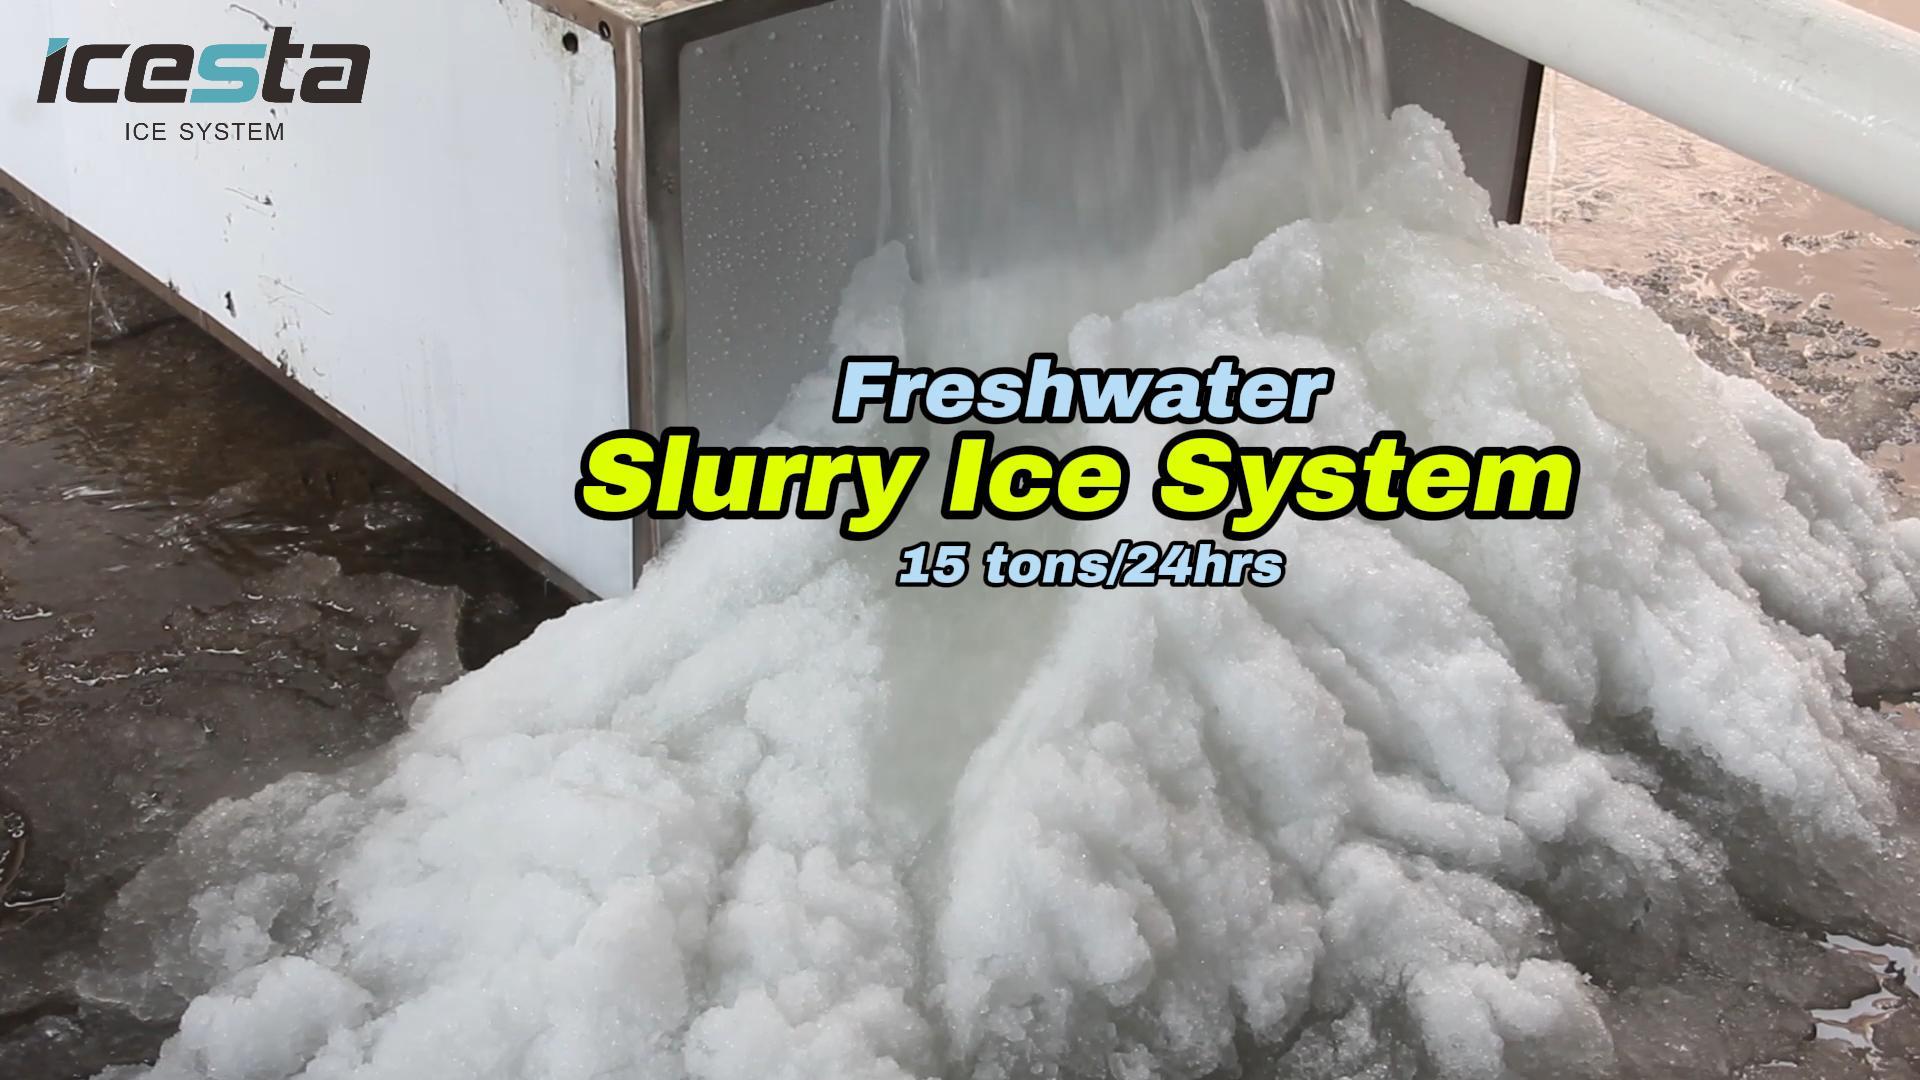 Freshwater Slurry Ice System - 15 tons/24hrs